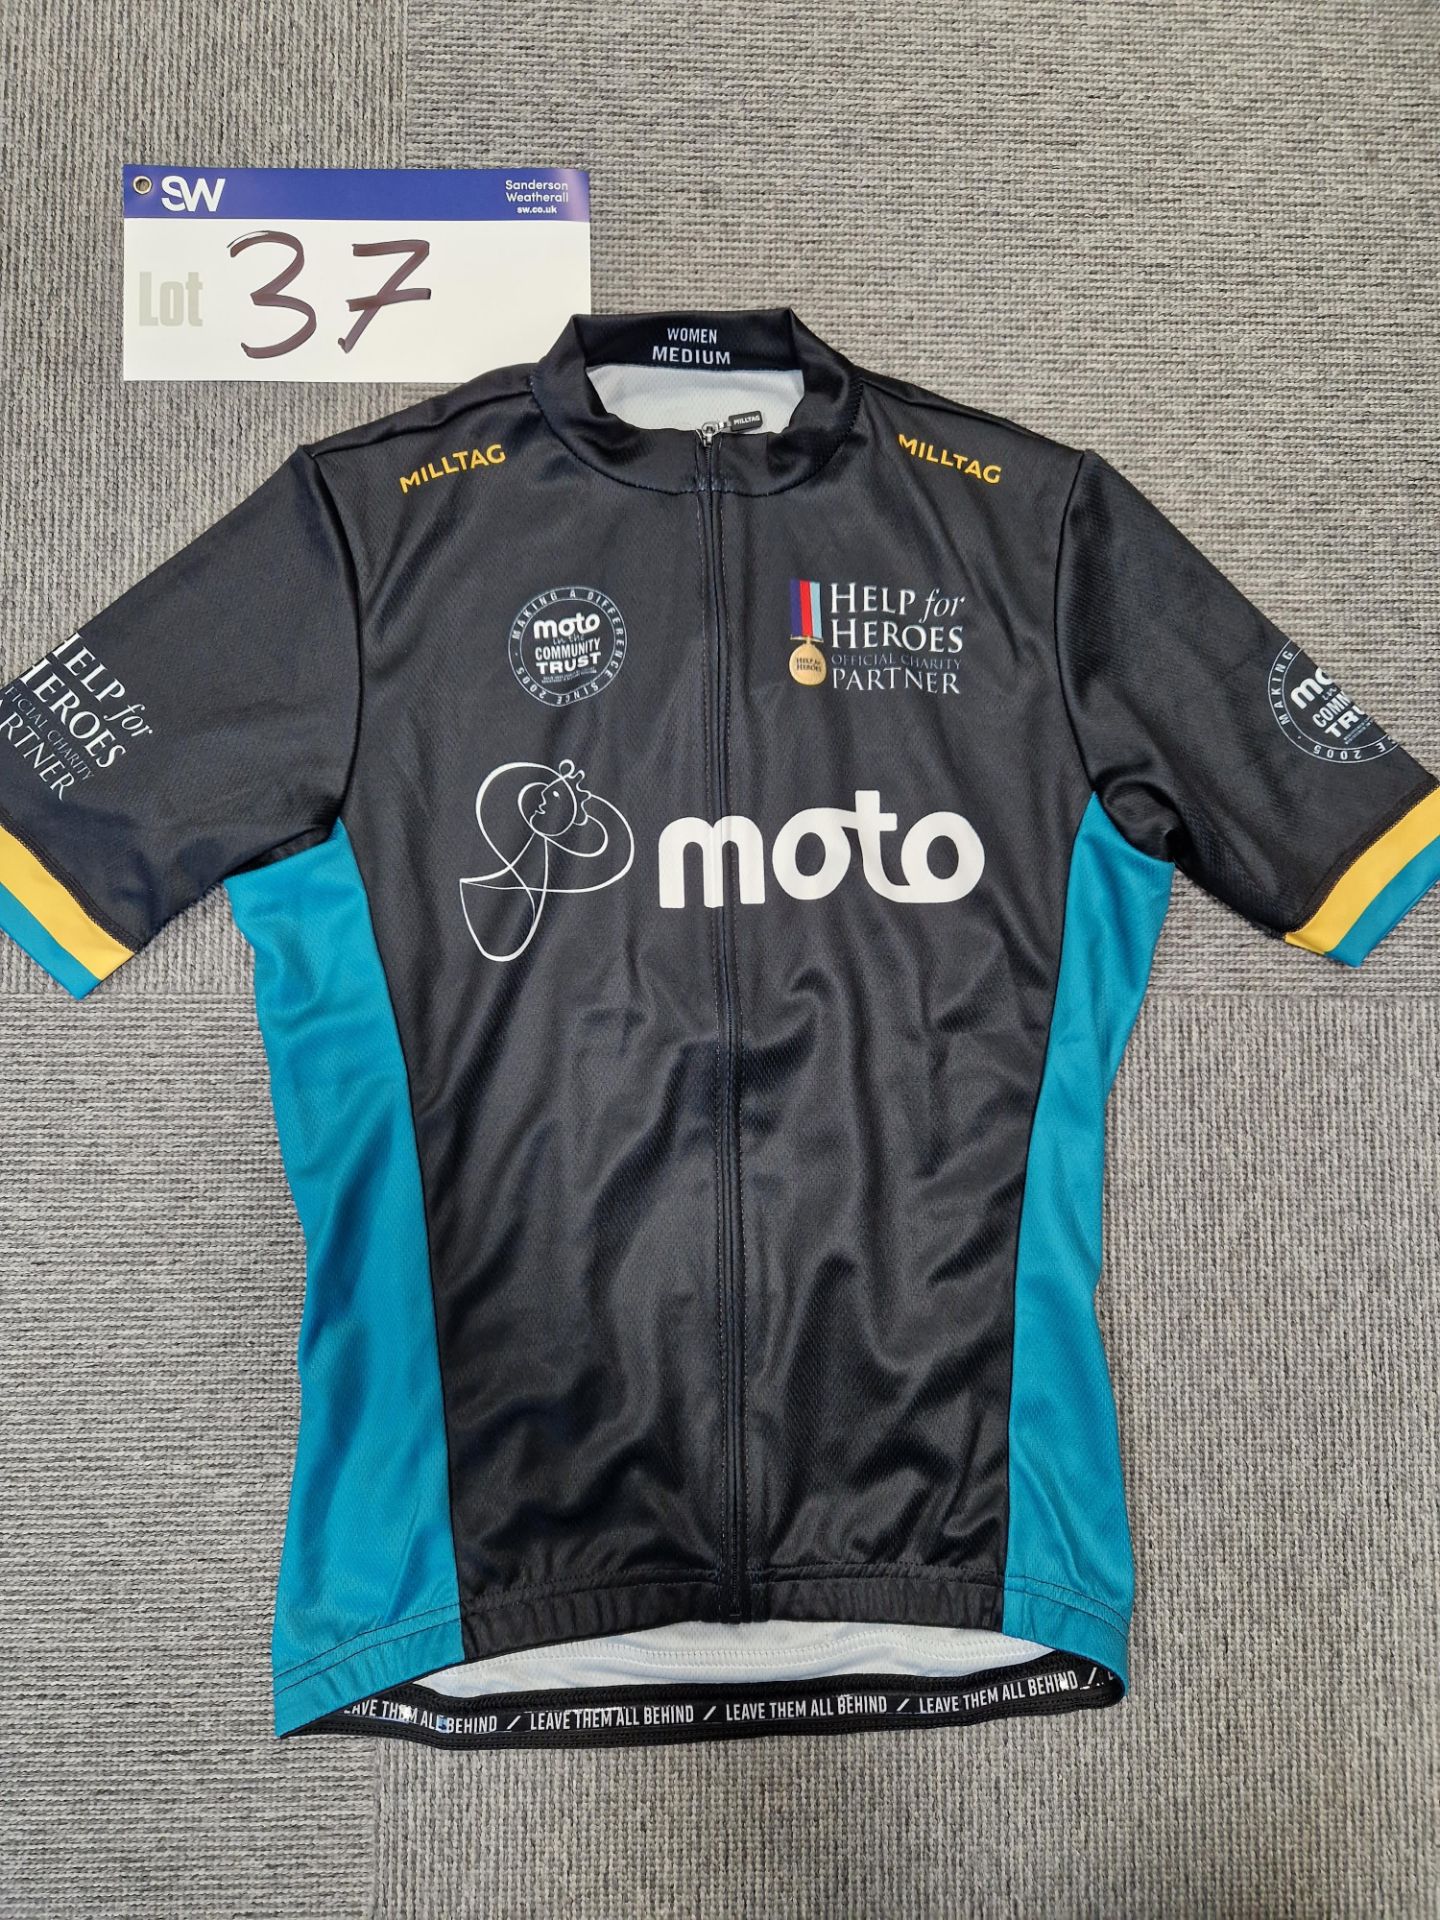 Women's Medium Milltag Cycling Jersey, Branded Moto, 100% PolyesterPlease read the following